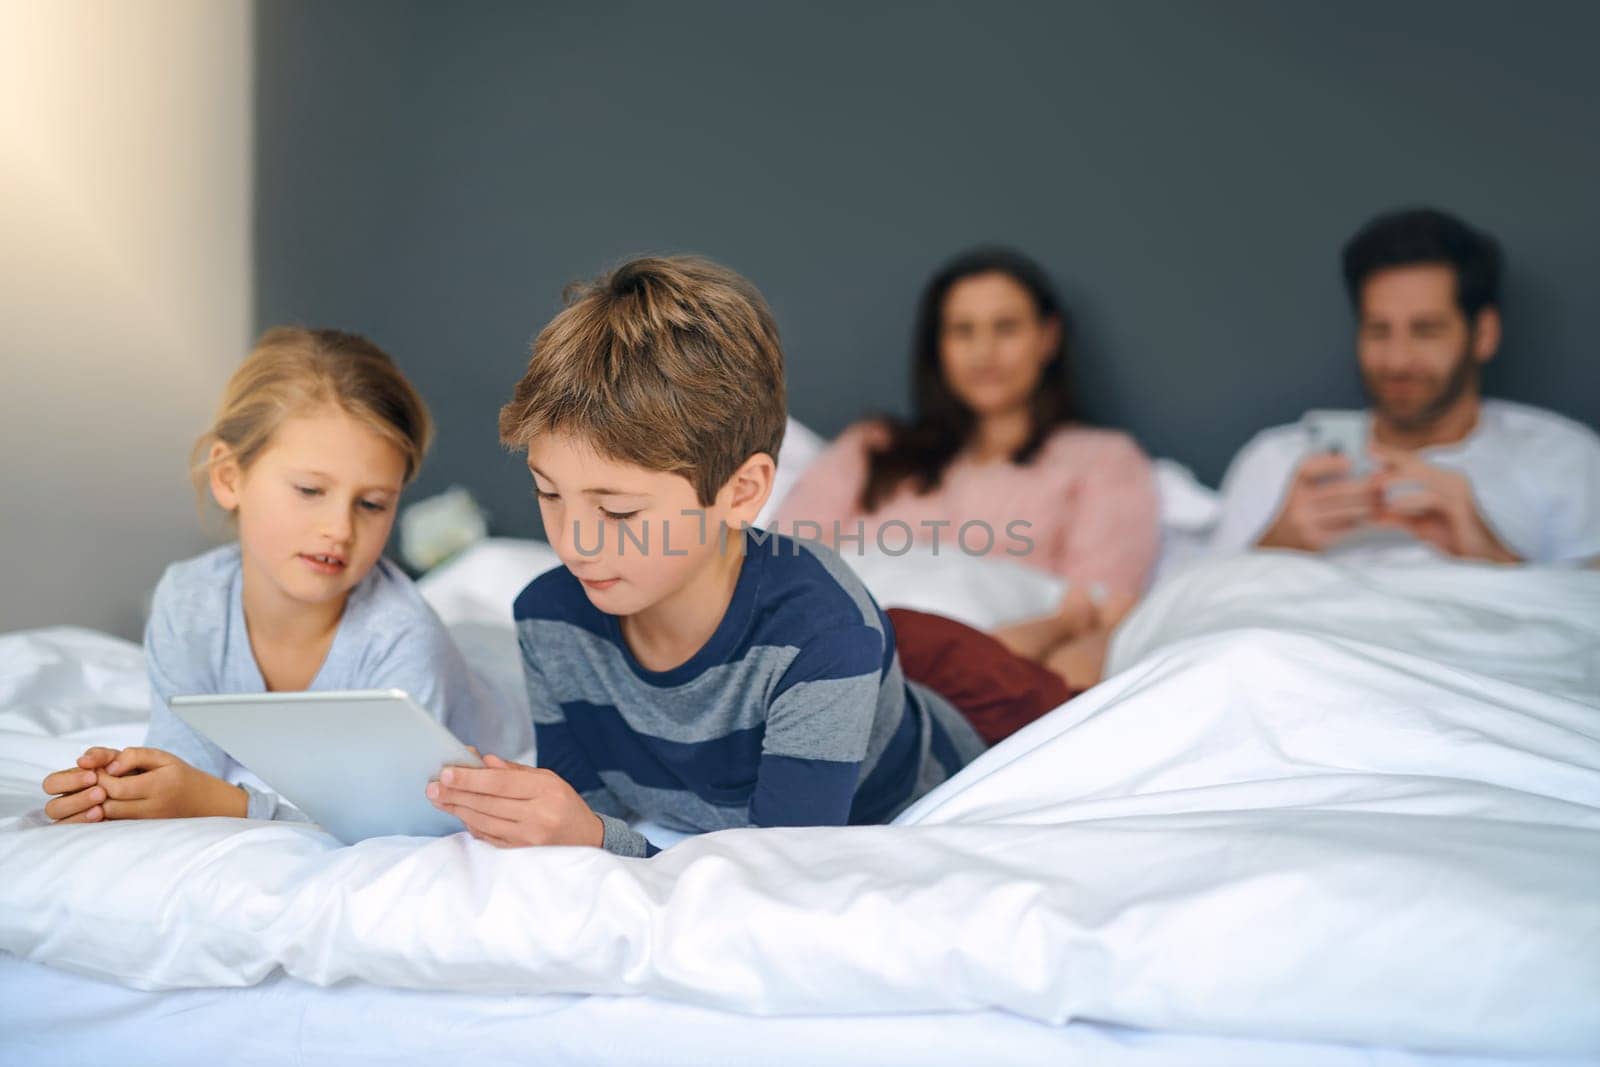 Mornings in our home. an adorable little girl and boy using a tablet together while their parents are chilling in bed at home